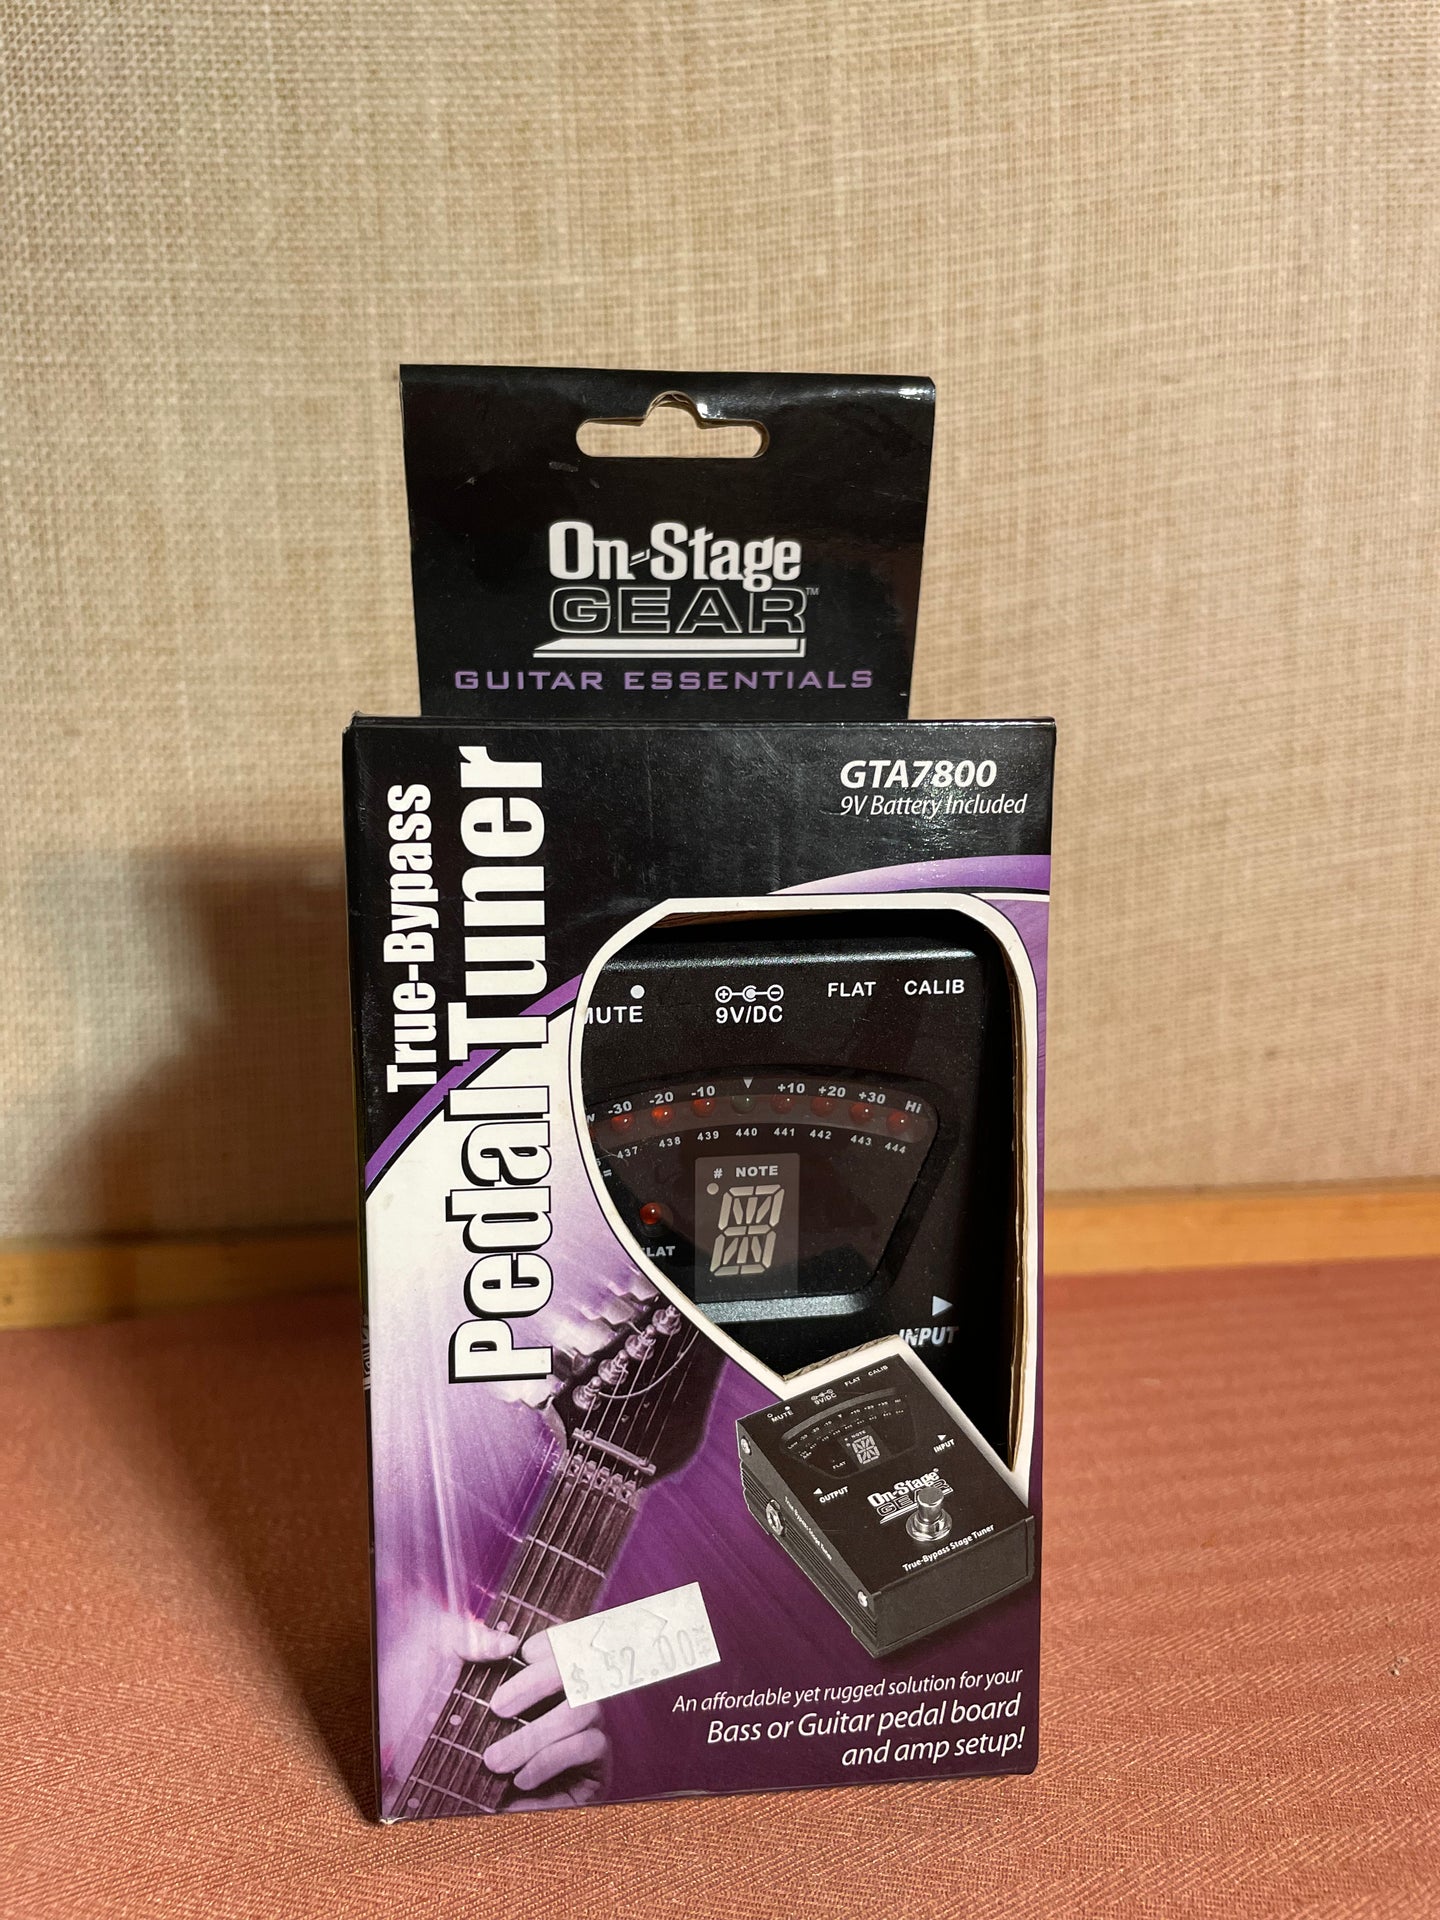 On-Stage Gear Pedal Tuner